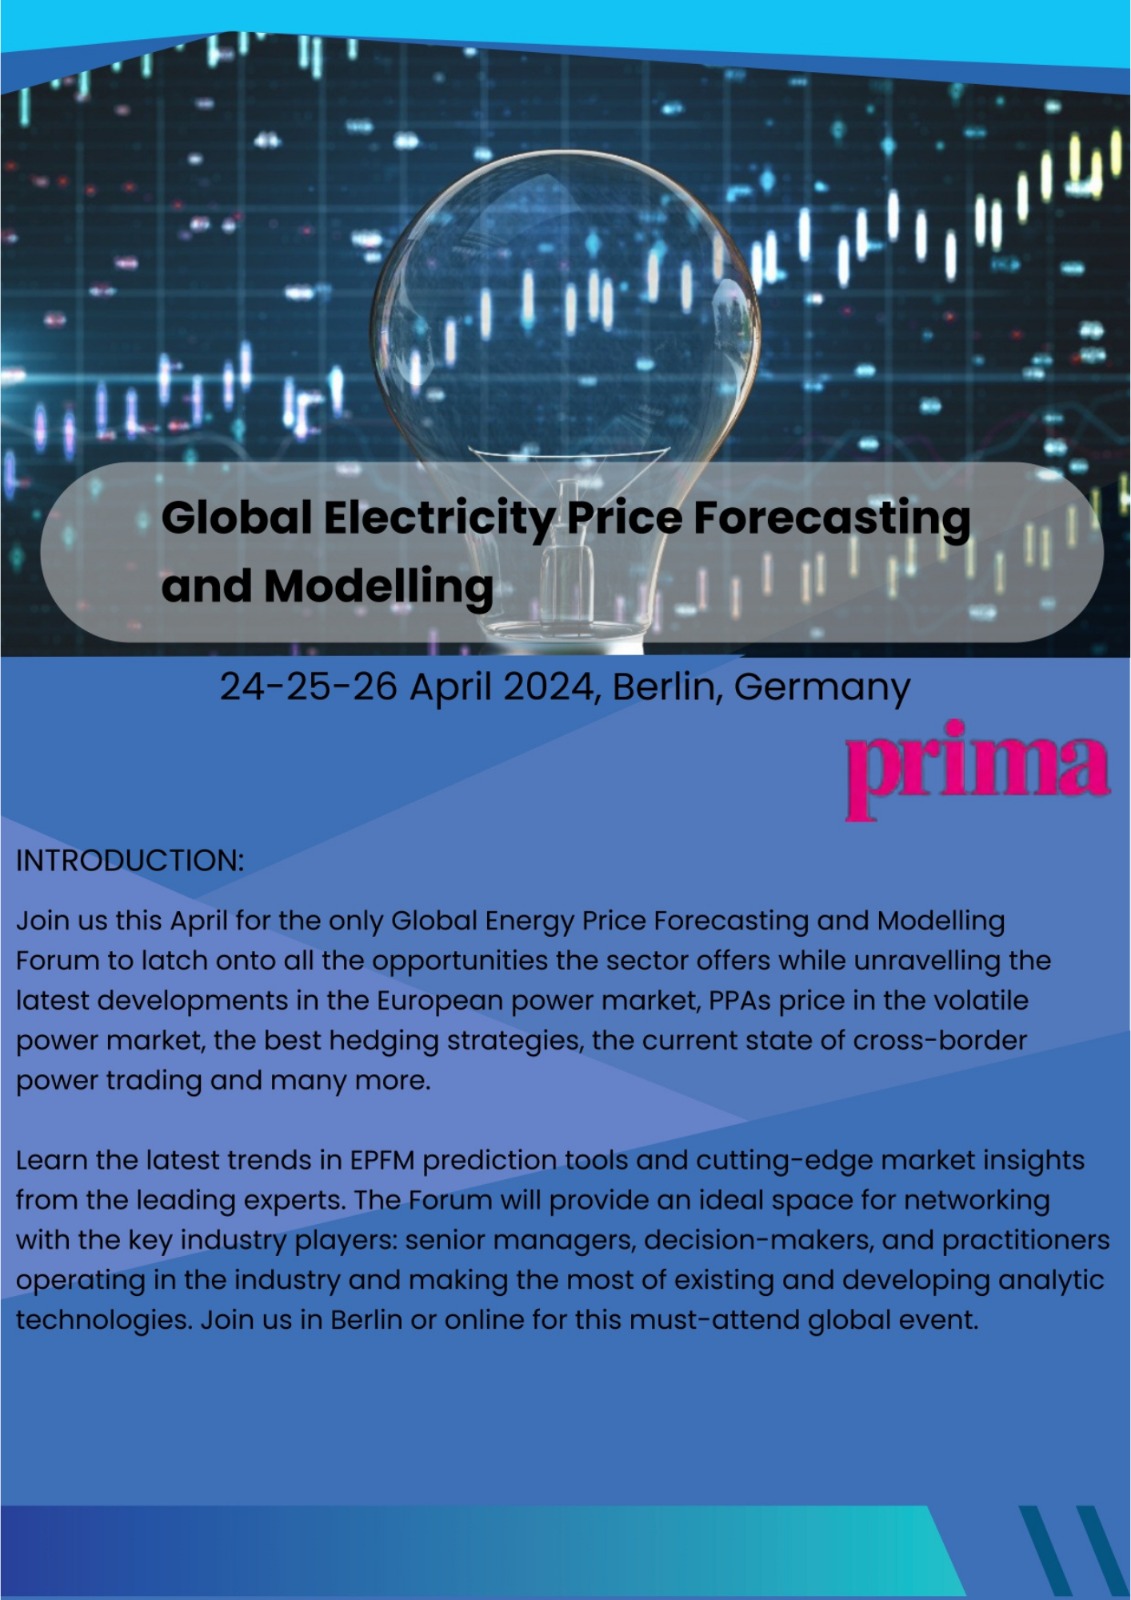 The  Global Electricity Price Forecasting and Modelling Forum  24-25-26 April 2024, Berlin Germany, Berlin, Germany